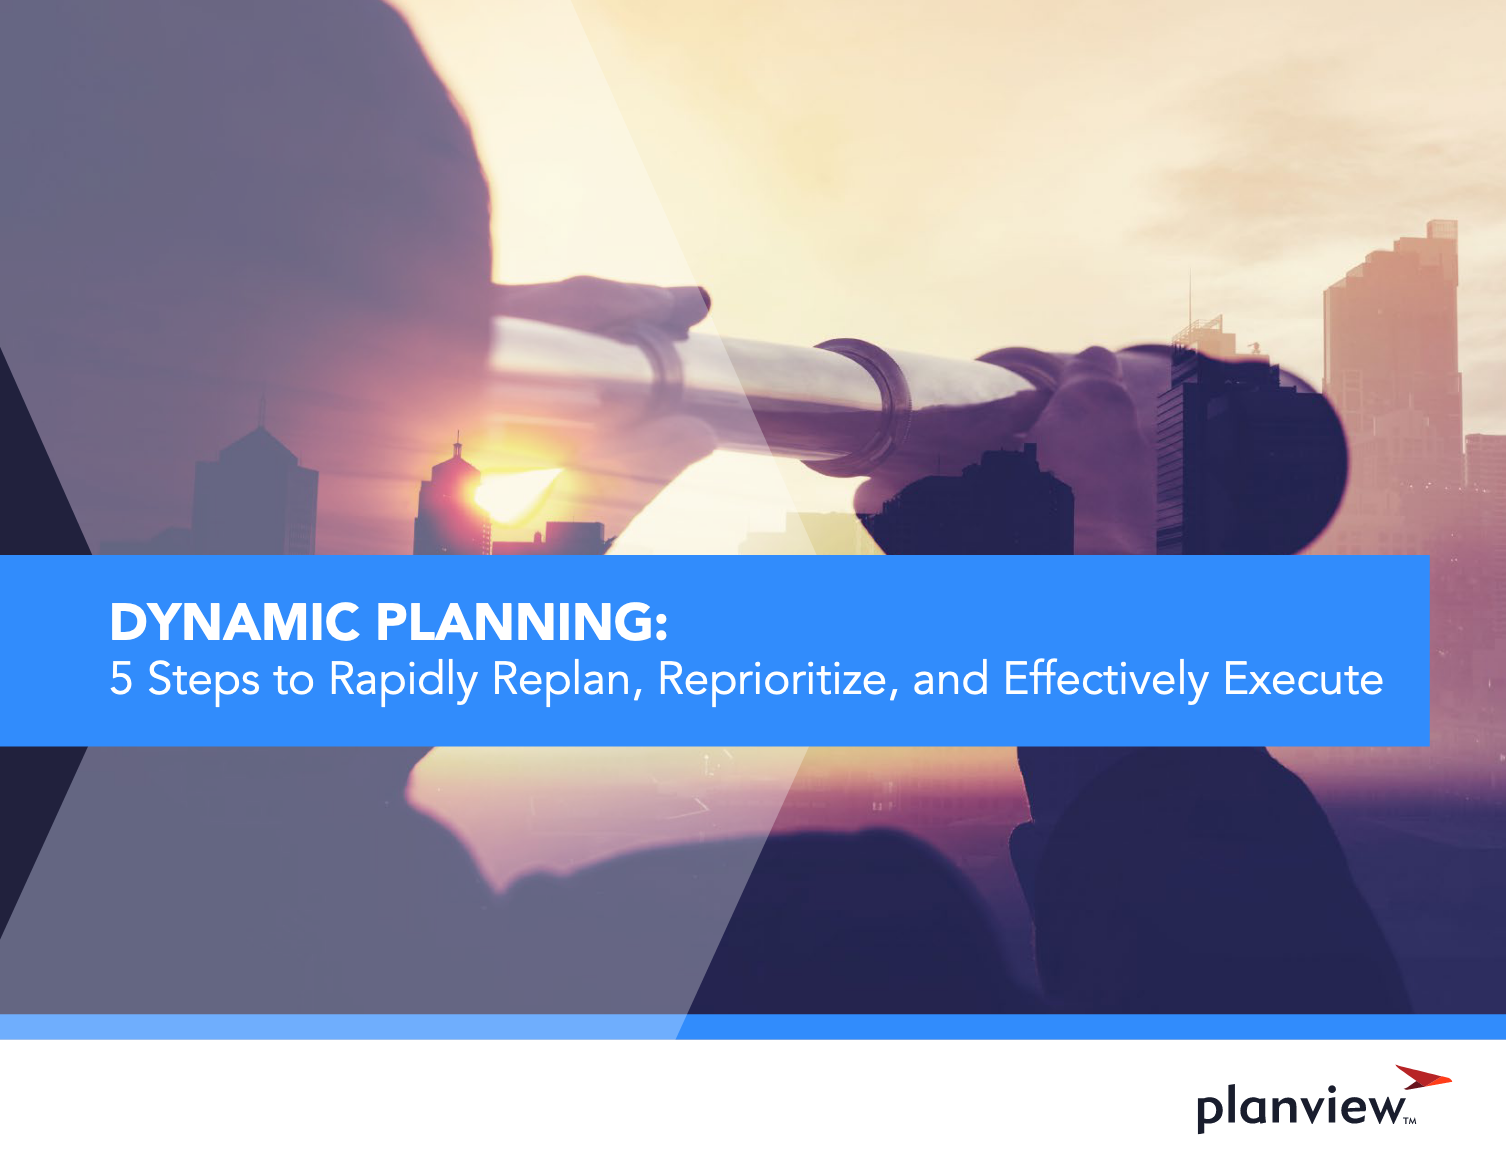 Screenshot 2020 11 06 Planview eBook – Dynamic Planning 5 Steps to Rapidly Replan Reprioritize and Effectively Execute ... - DYNAMIC PLANNING